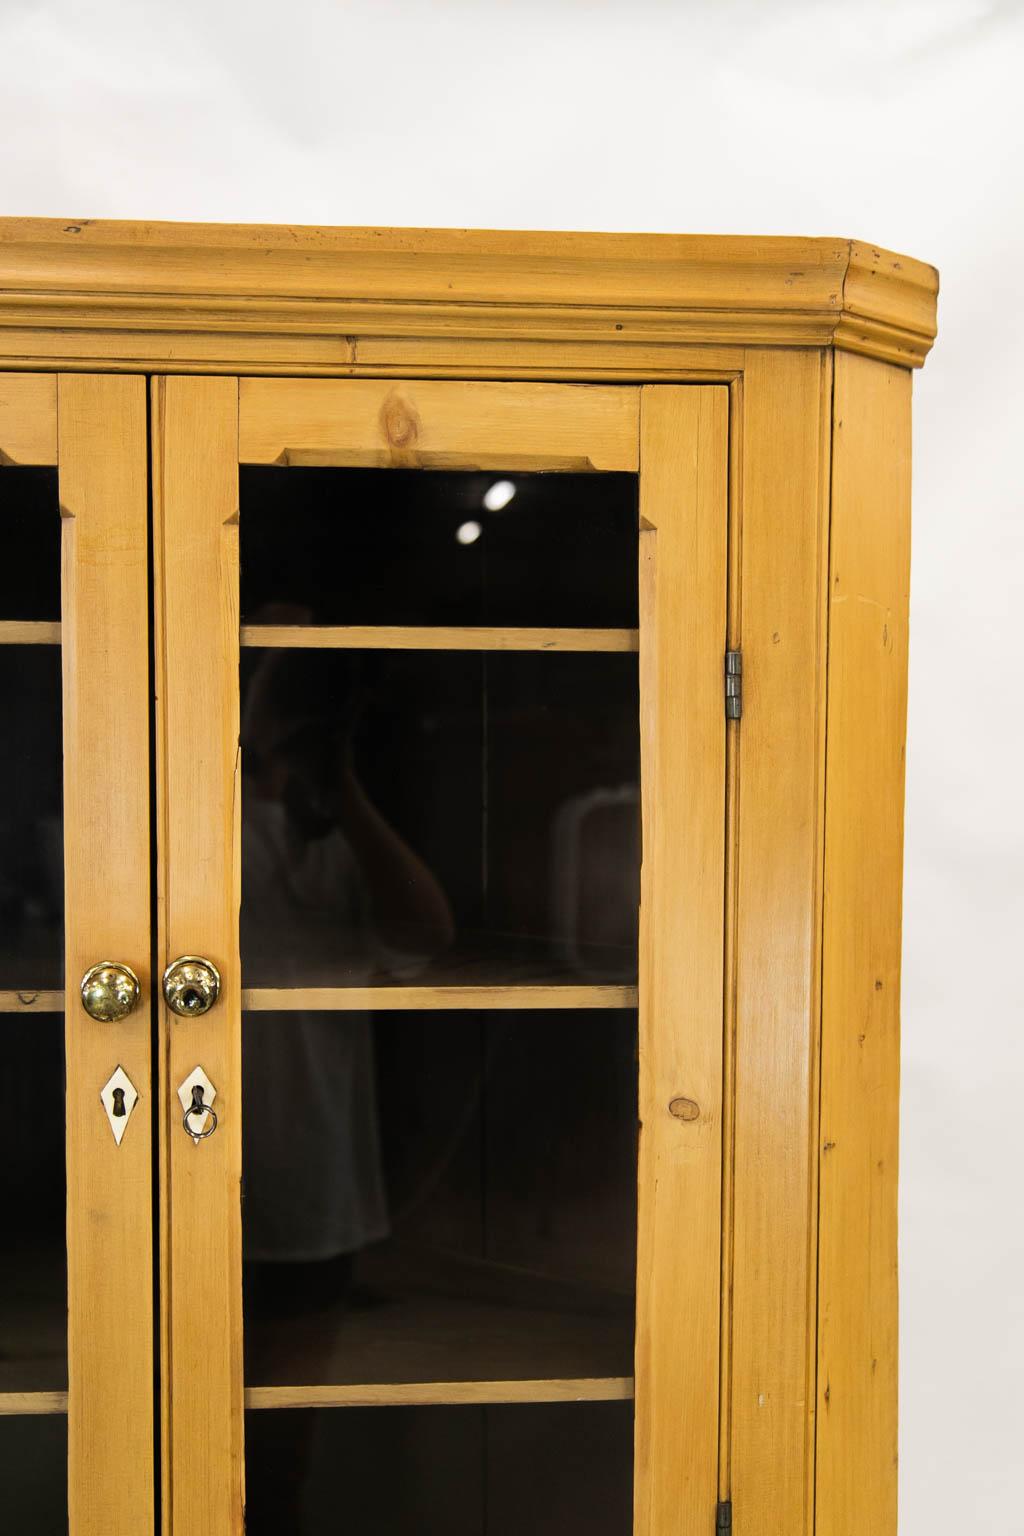 The top of this corner cupboard has two glazed doors which are recessed and framed with chamfered moldings. The lower doors have solid panels with matching chamfered moldings. The center drawer is a working drawer, but the flanking small drawer